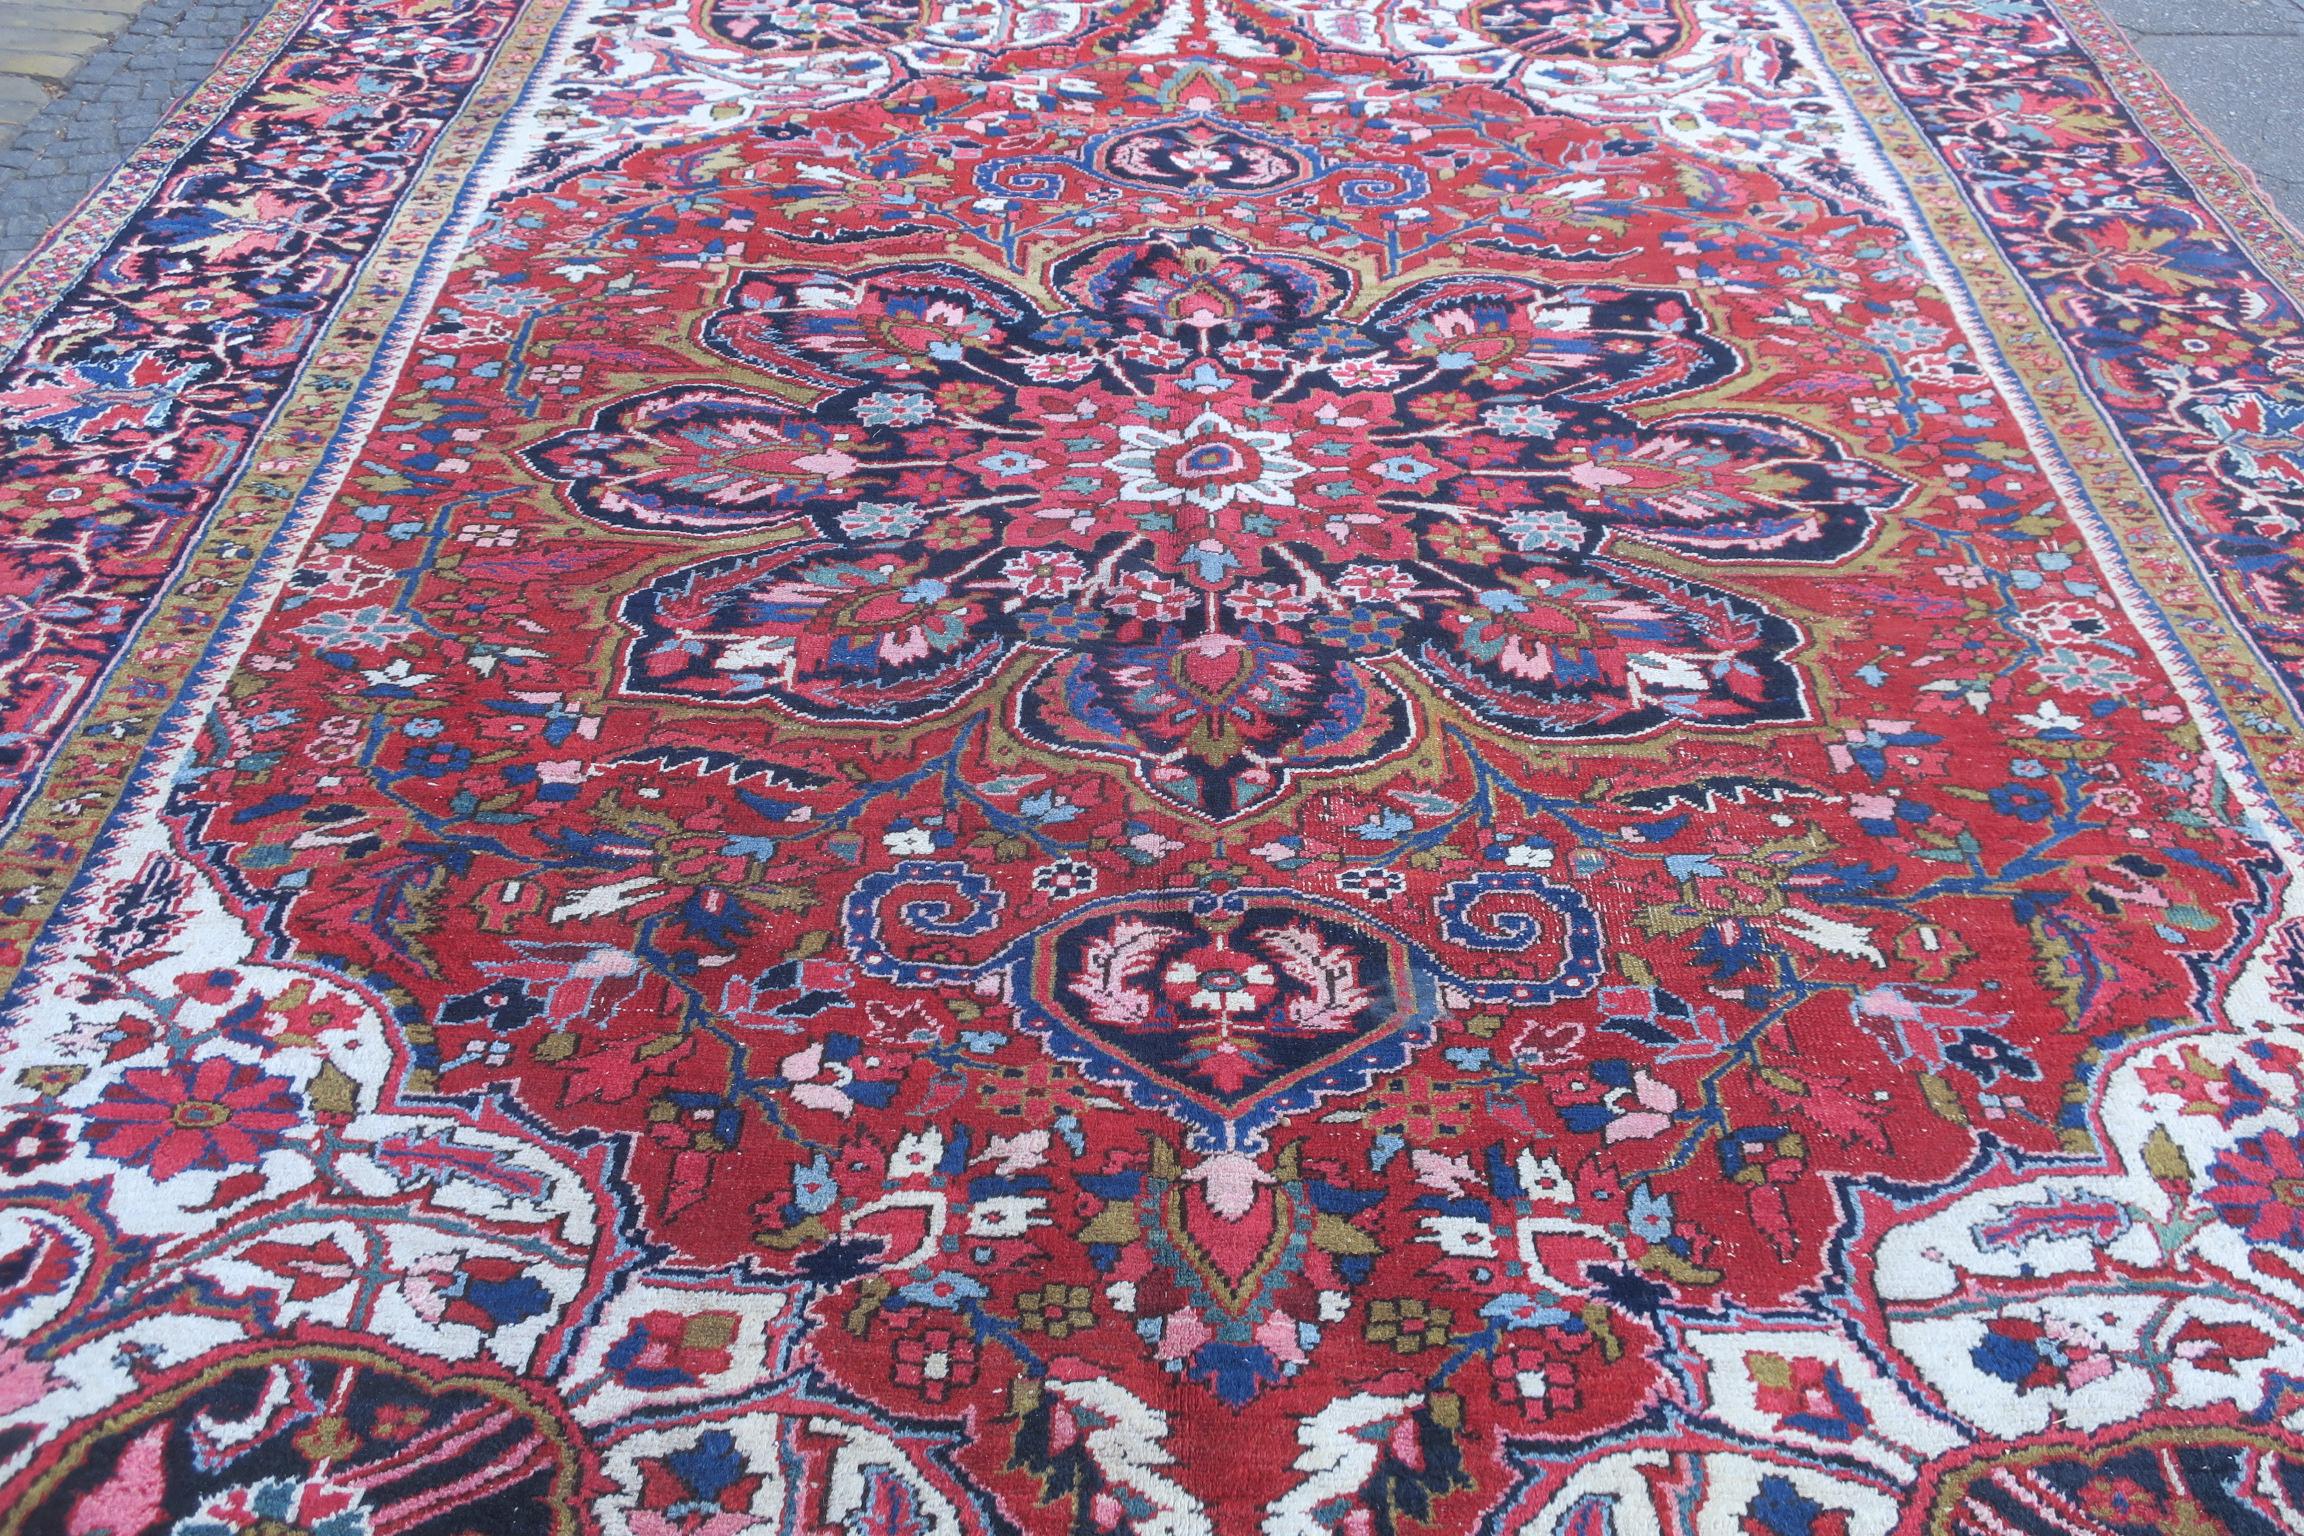 Persian Heriz carpet dating from circa 1930 with a striking design and ivory background.
Very good vintage condition with small signs of use.